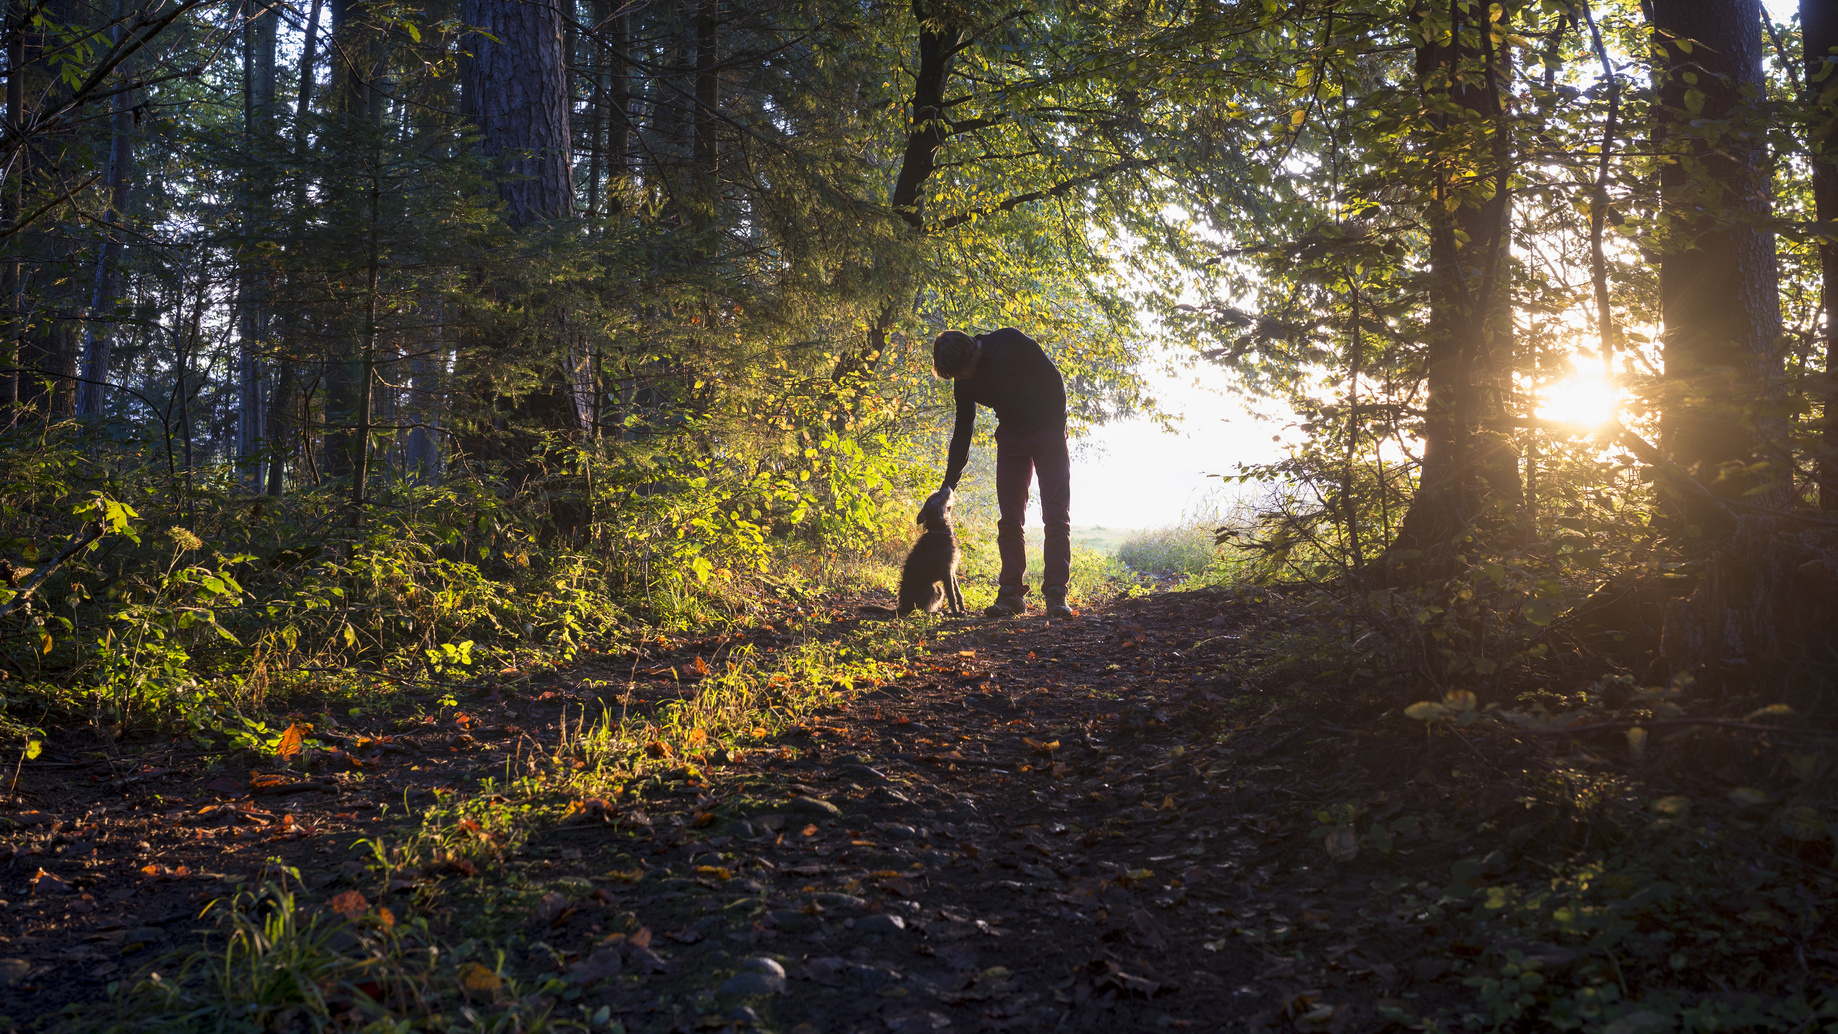 Man bending down to pet his black dog as they enjoy a beautiful nature in a glade in the woods backlit by the warm glow of the early morning sun.